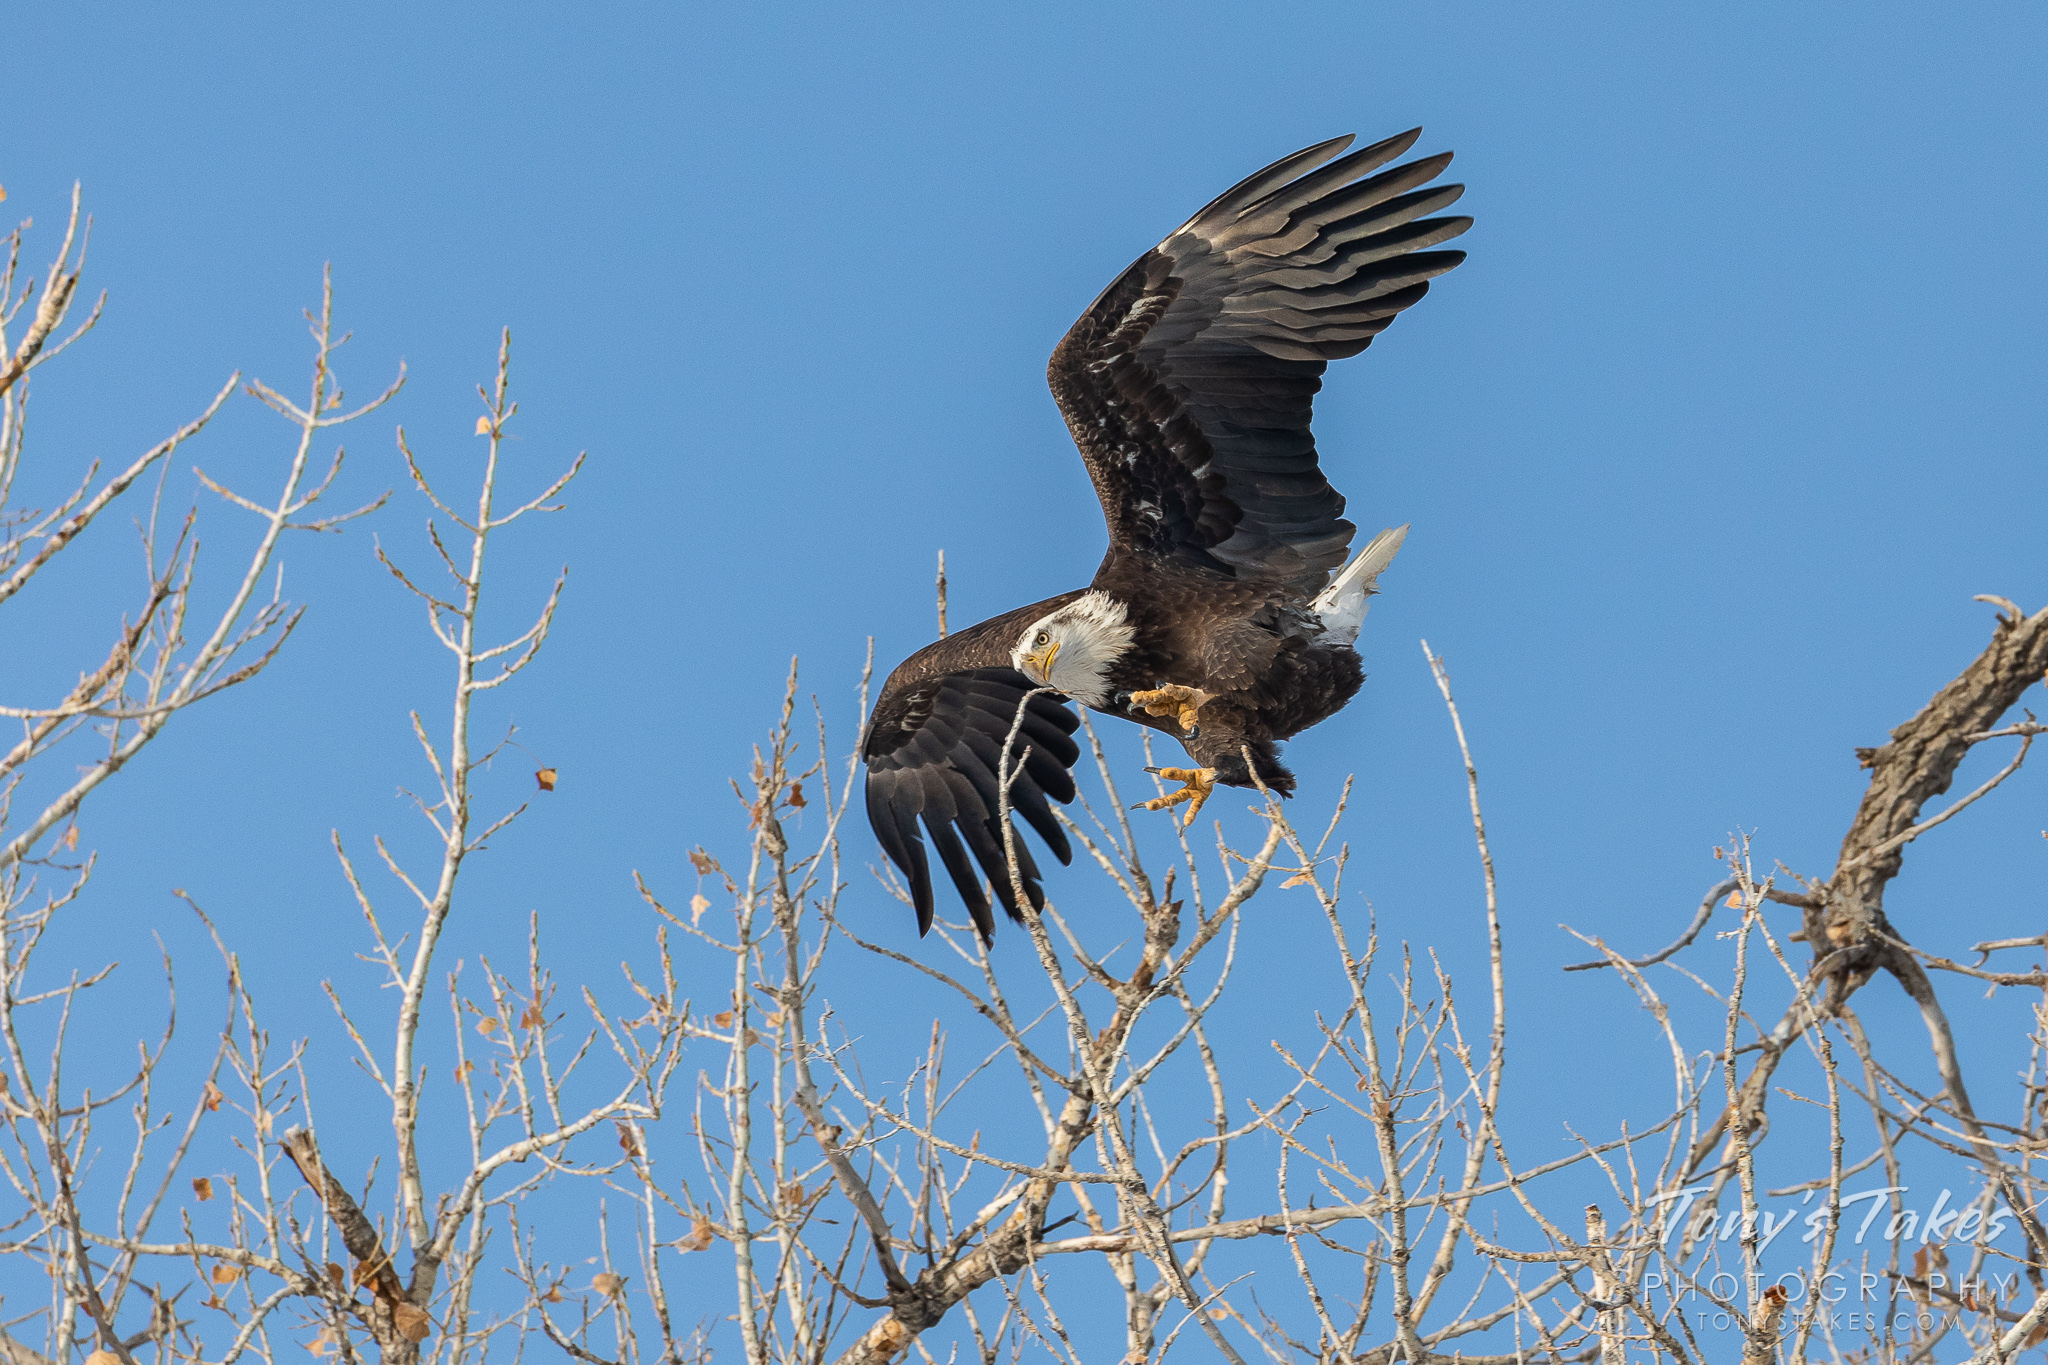 Female bald eagle gets ready to make the grab